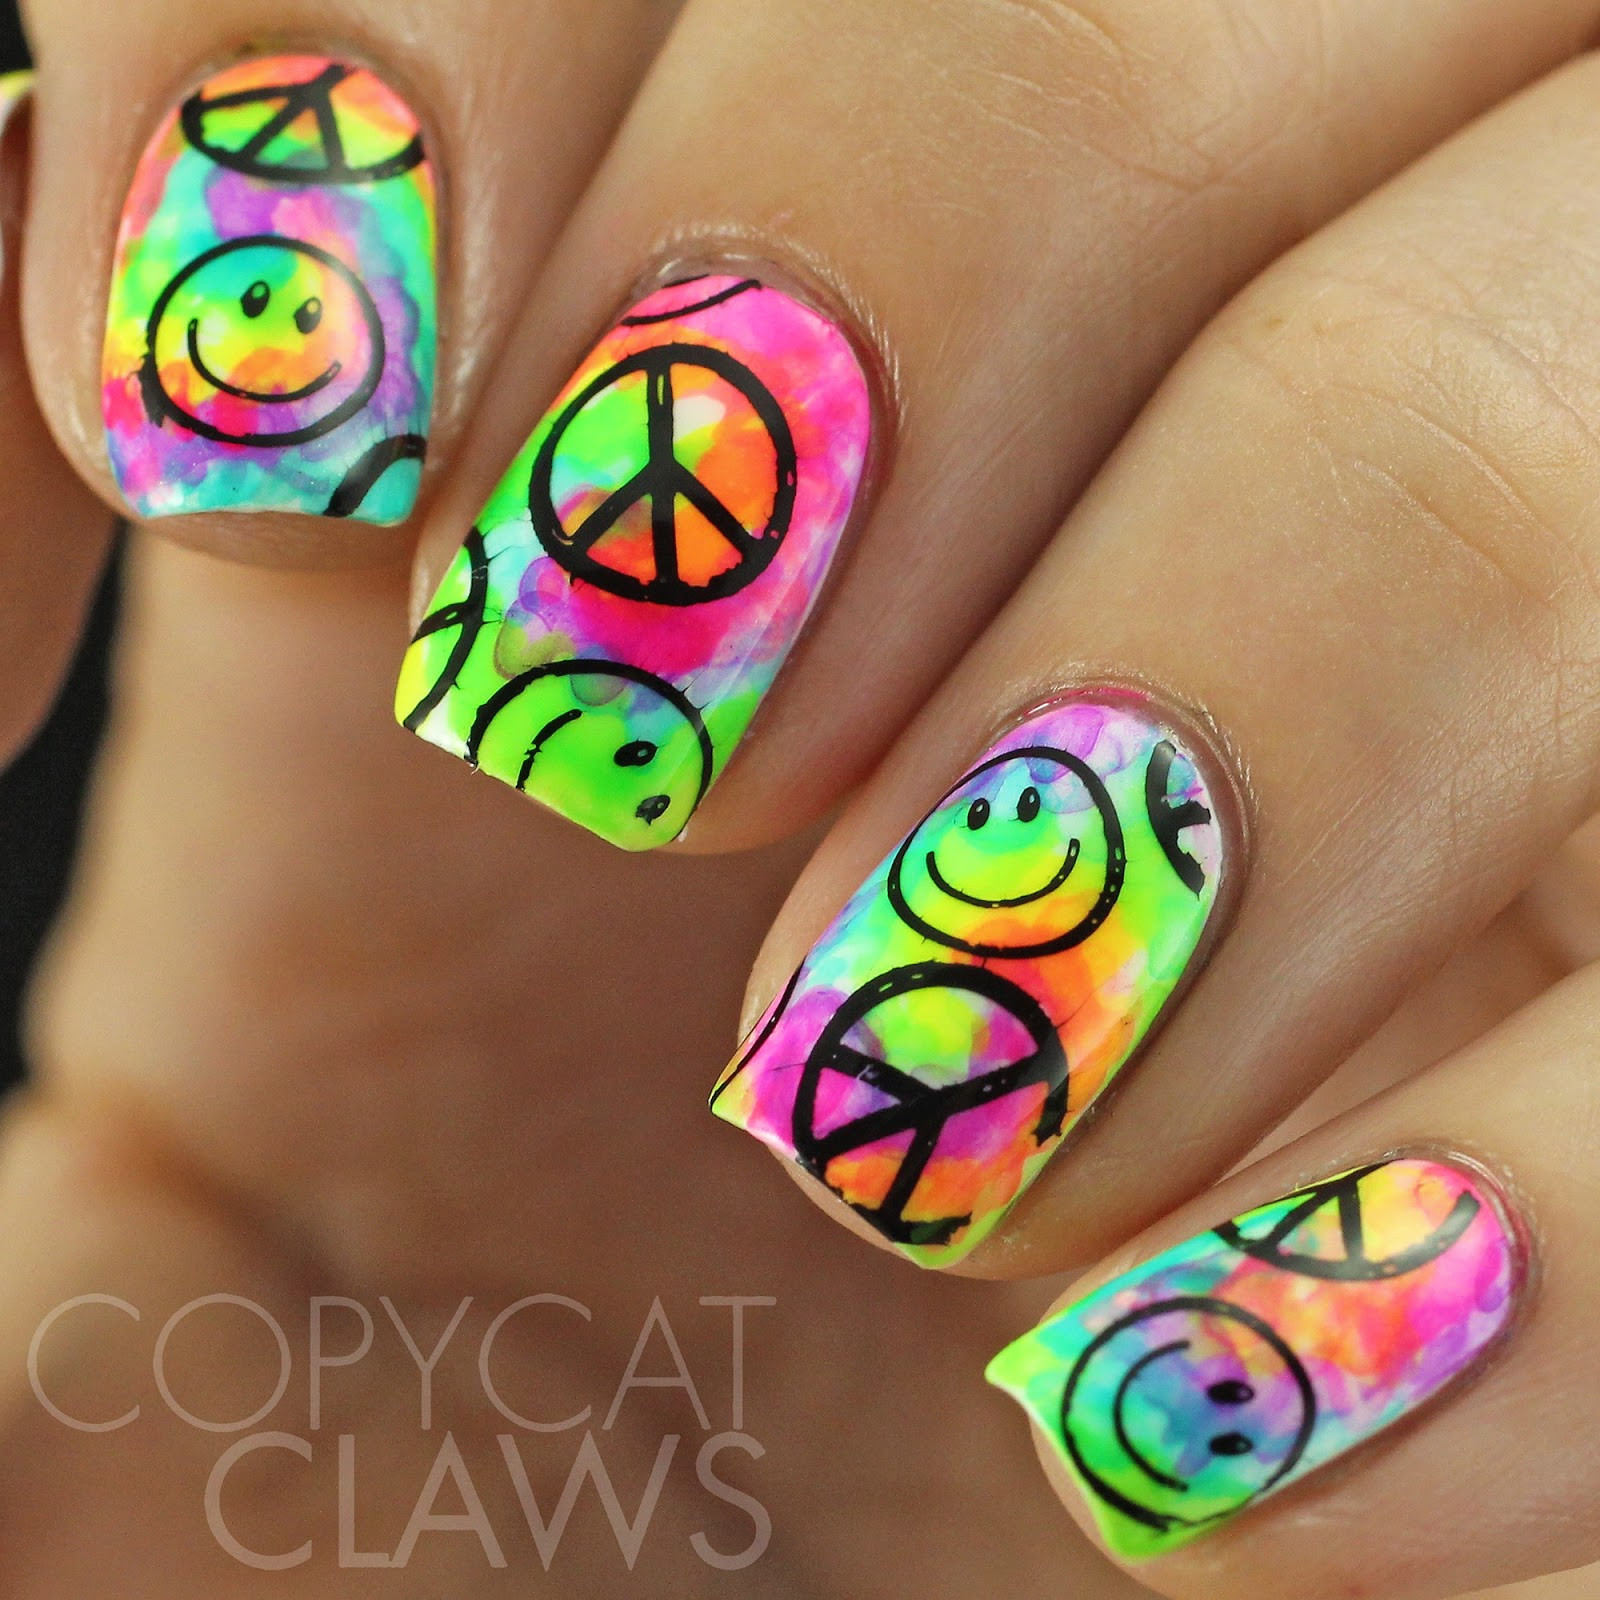 Tye Dye Nail Designs
 Copycat Claws Tie Dye Nails With Stamping